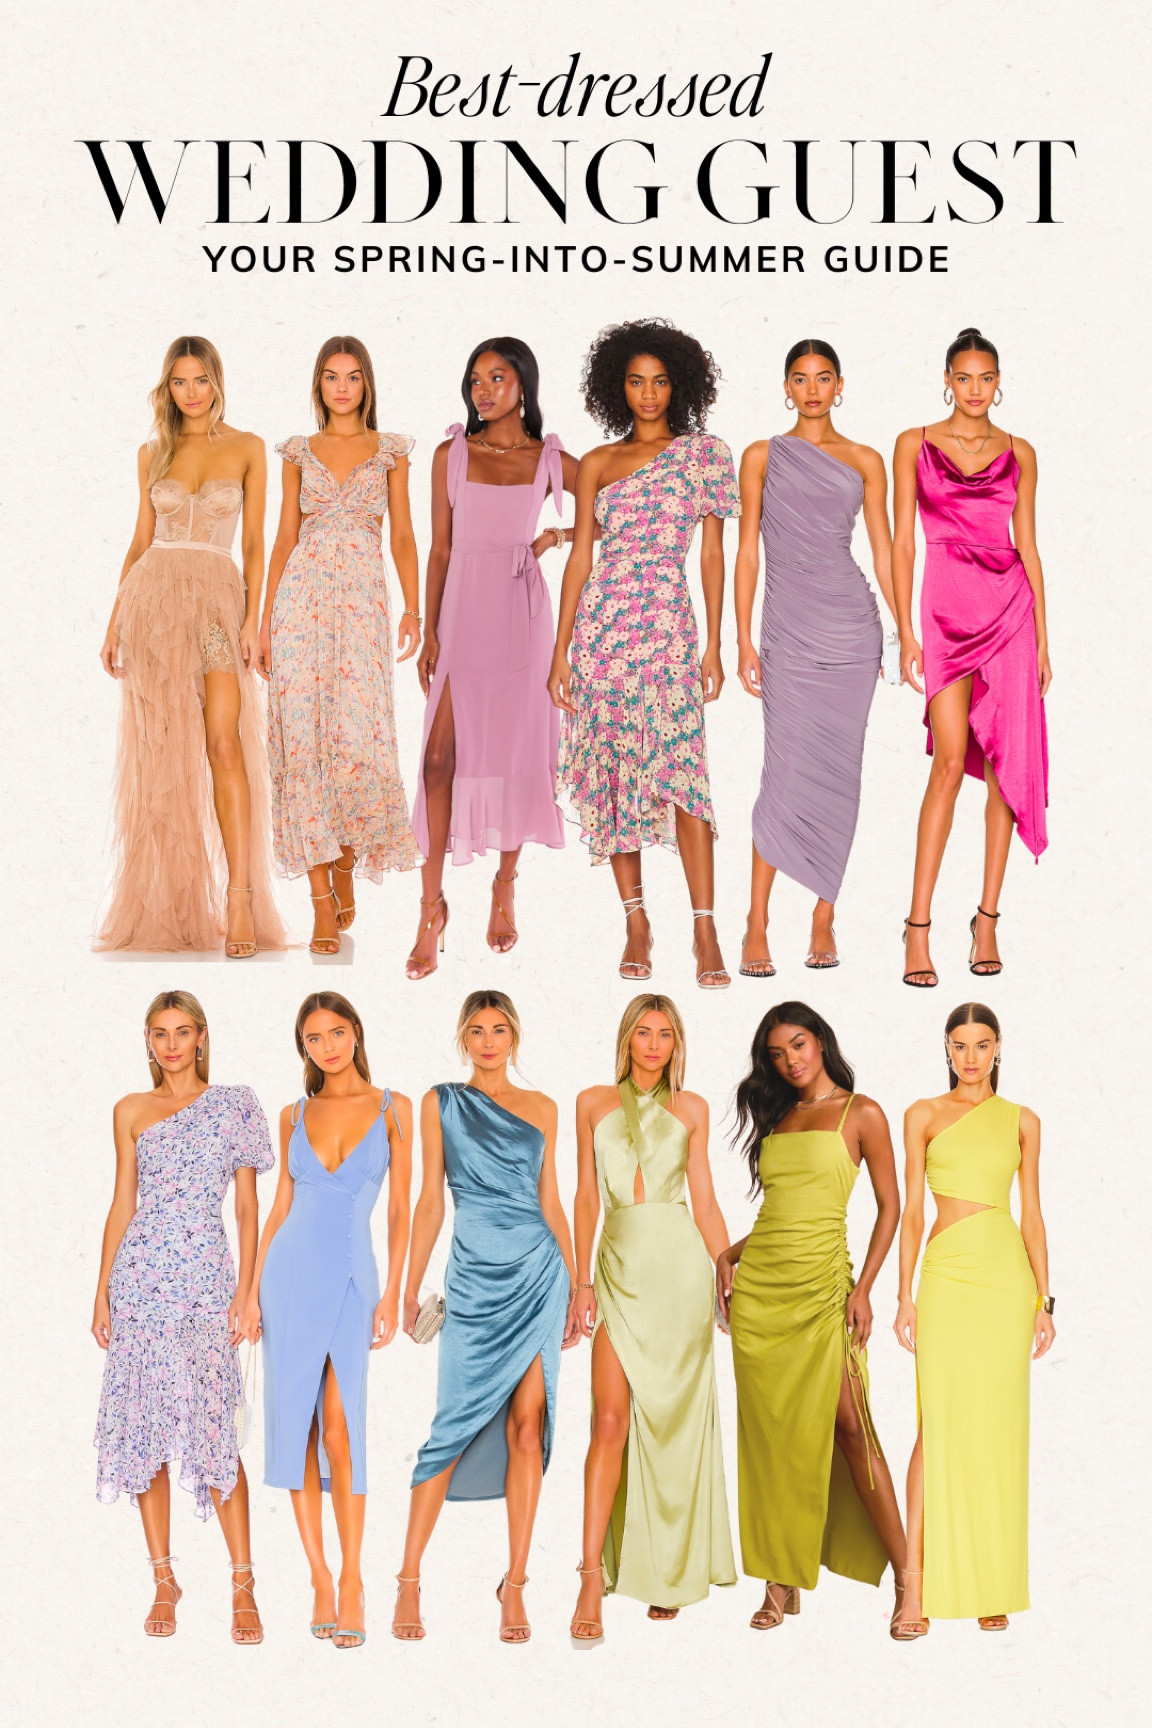 The Ultimate Wedding Guest Dress Guide for Spring / Summer 